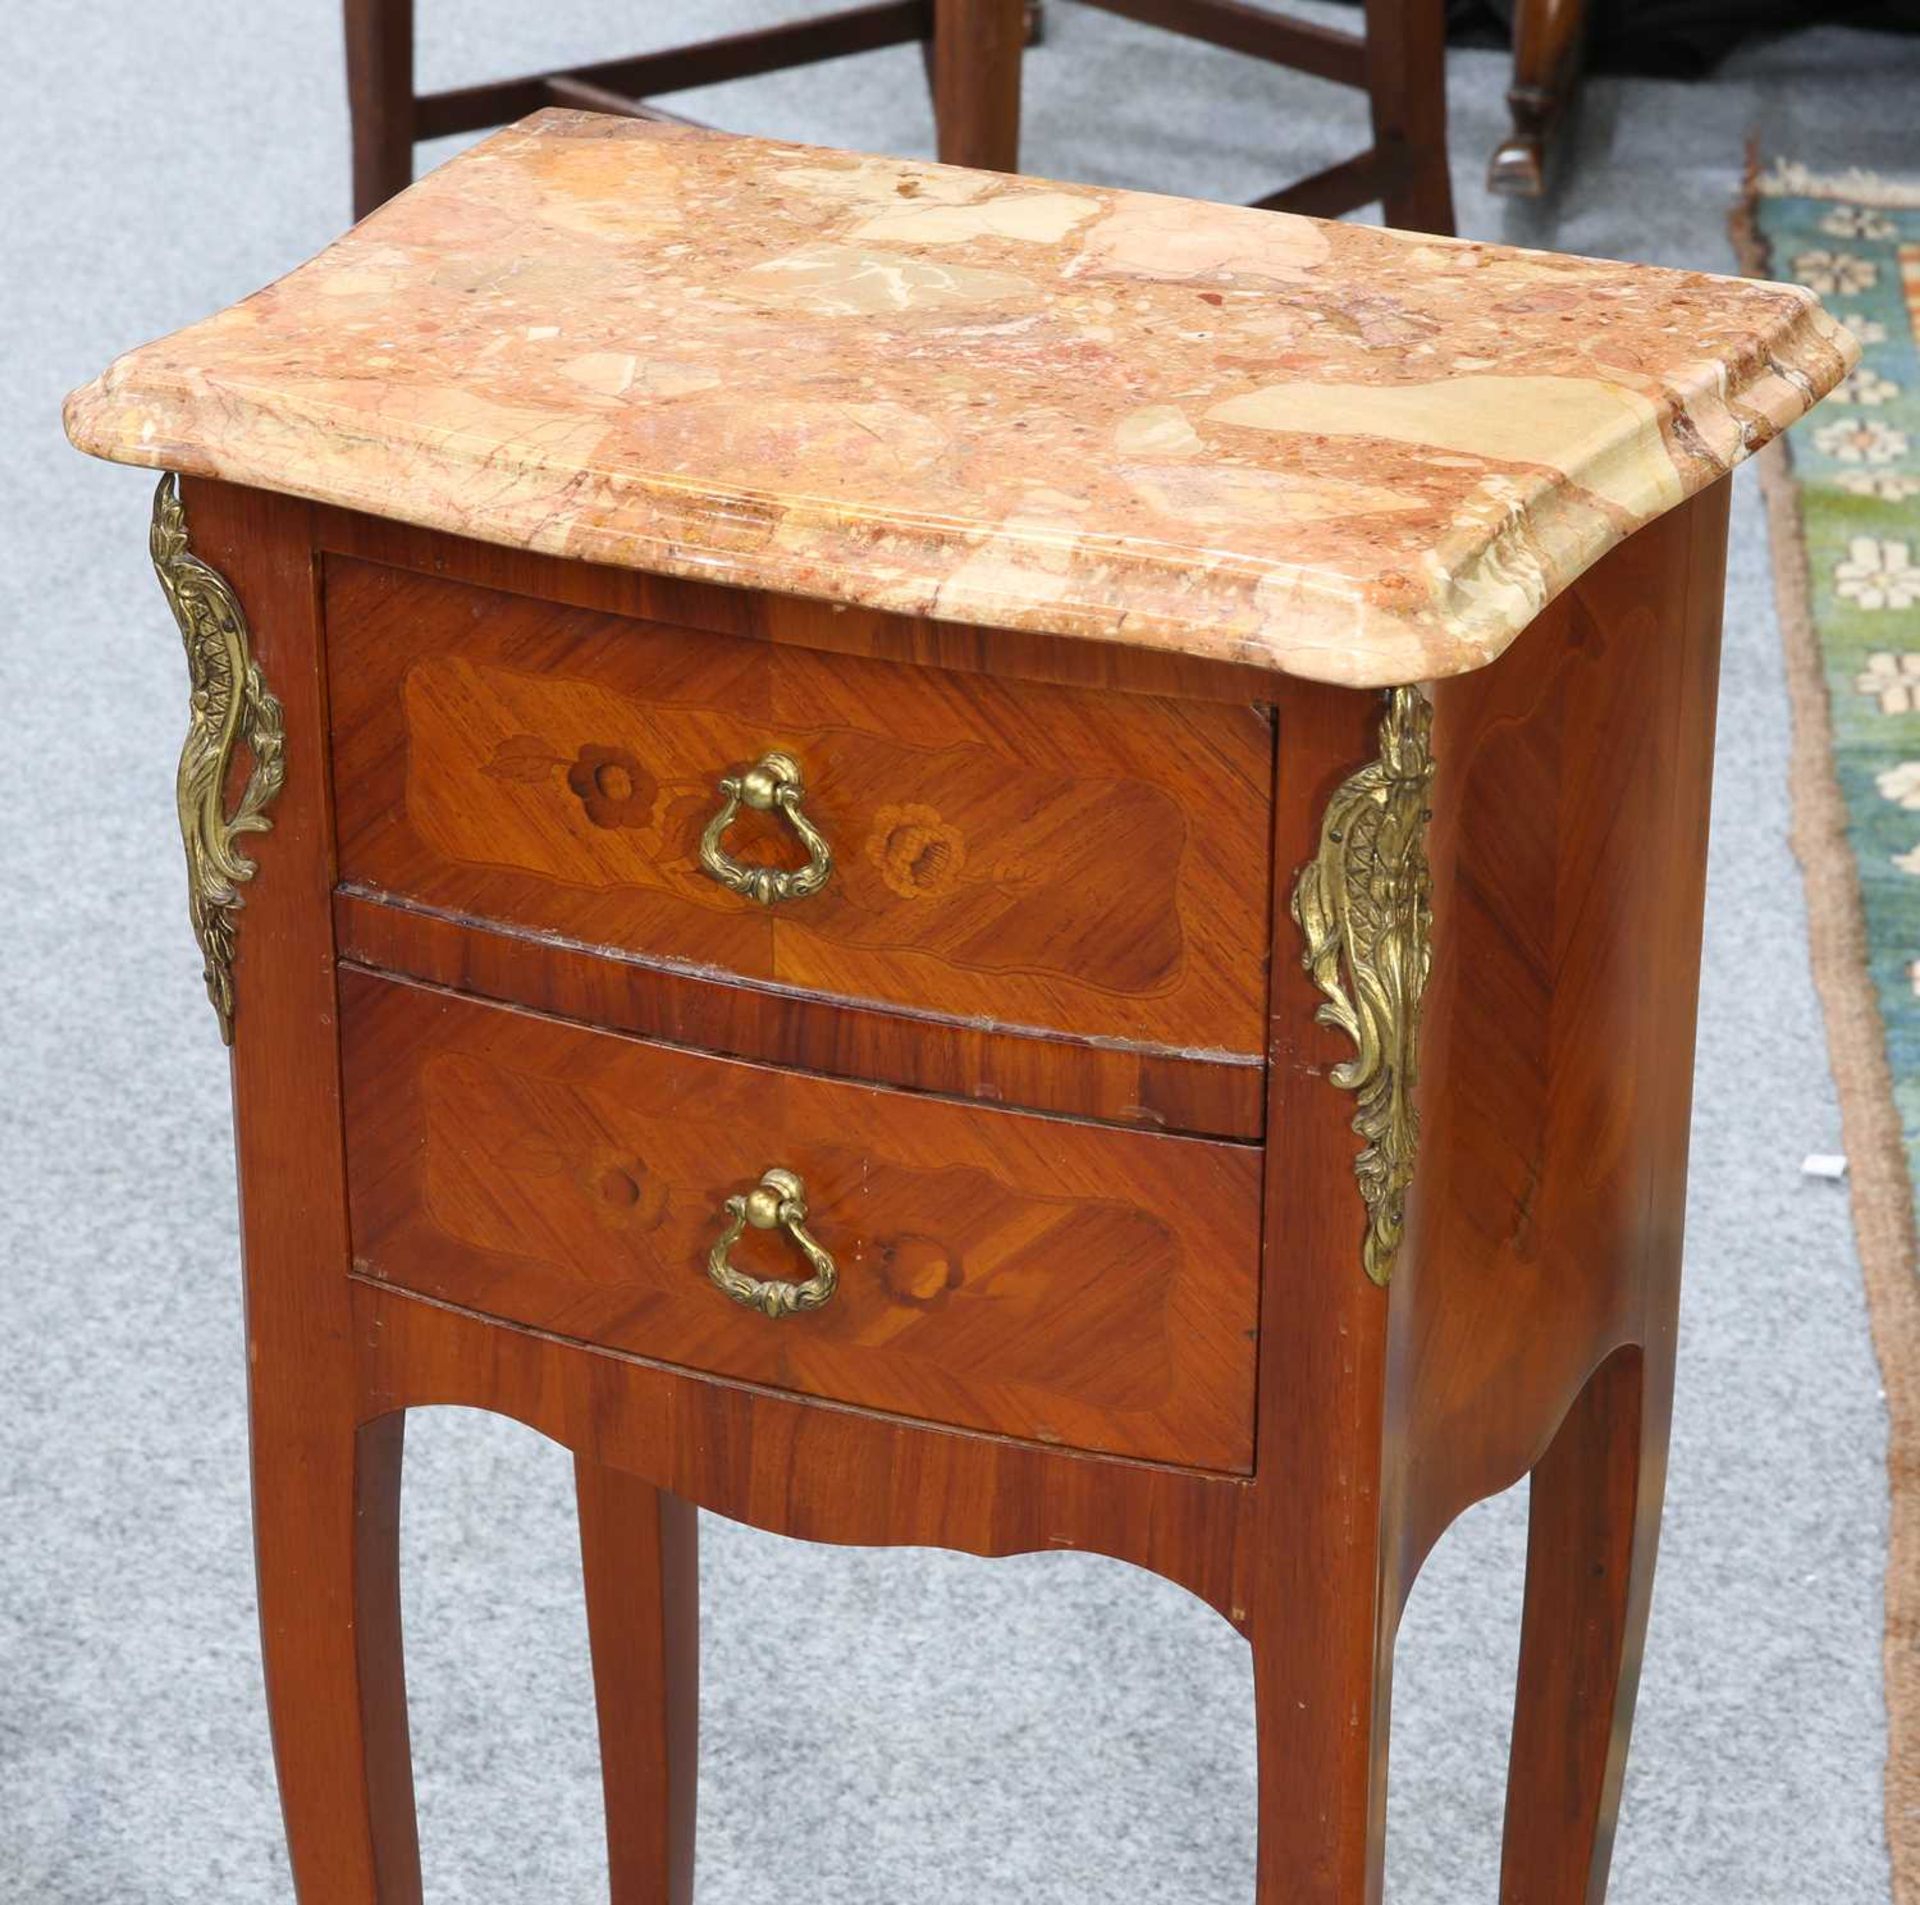 A PAIR OF LOUIS XV STYLE MARBLE-TOPPED AND GILT METAL-MOUNTED SIDE TABLES - Image 2 of 2